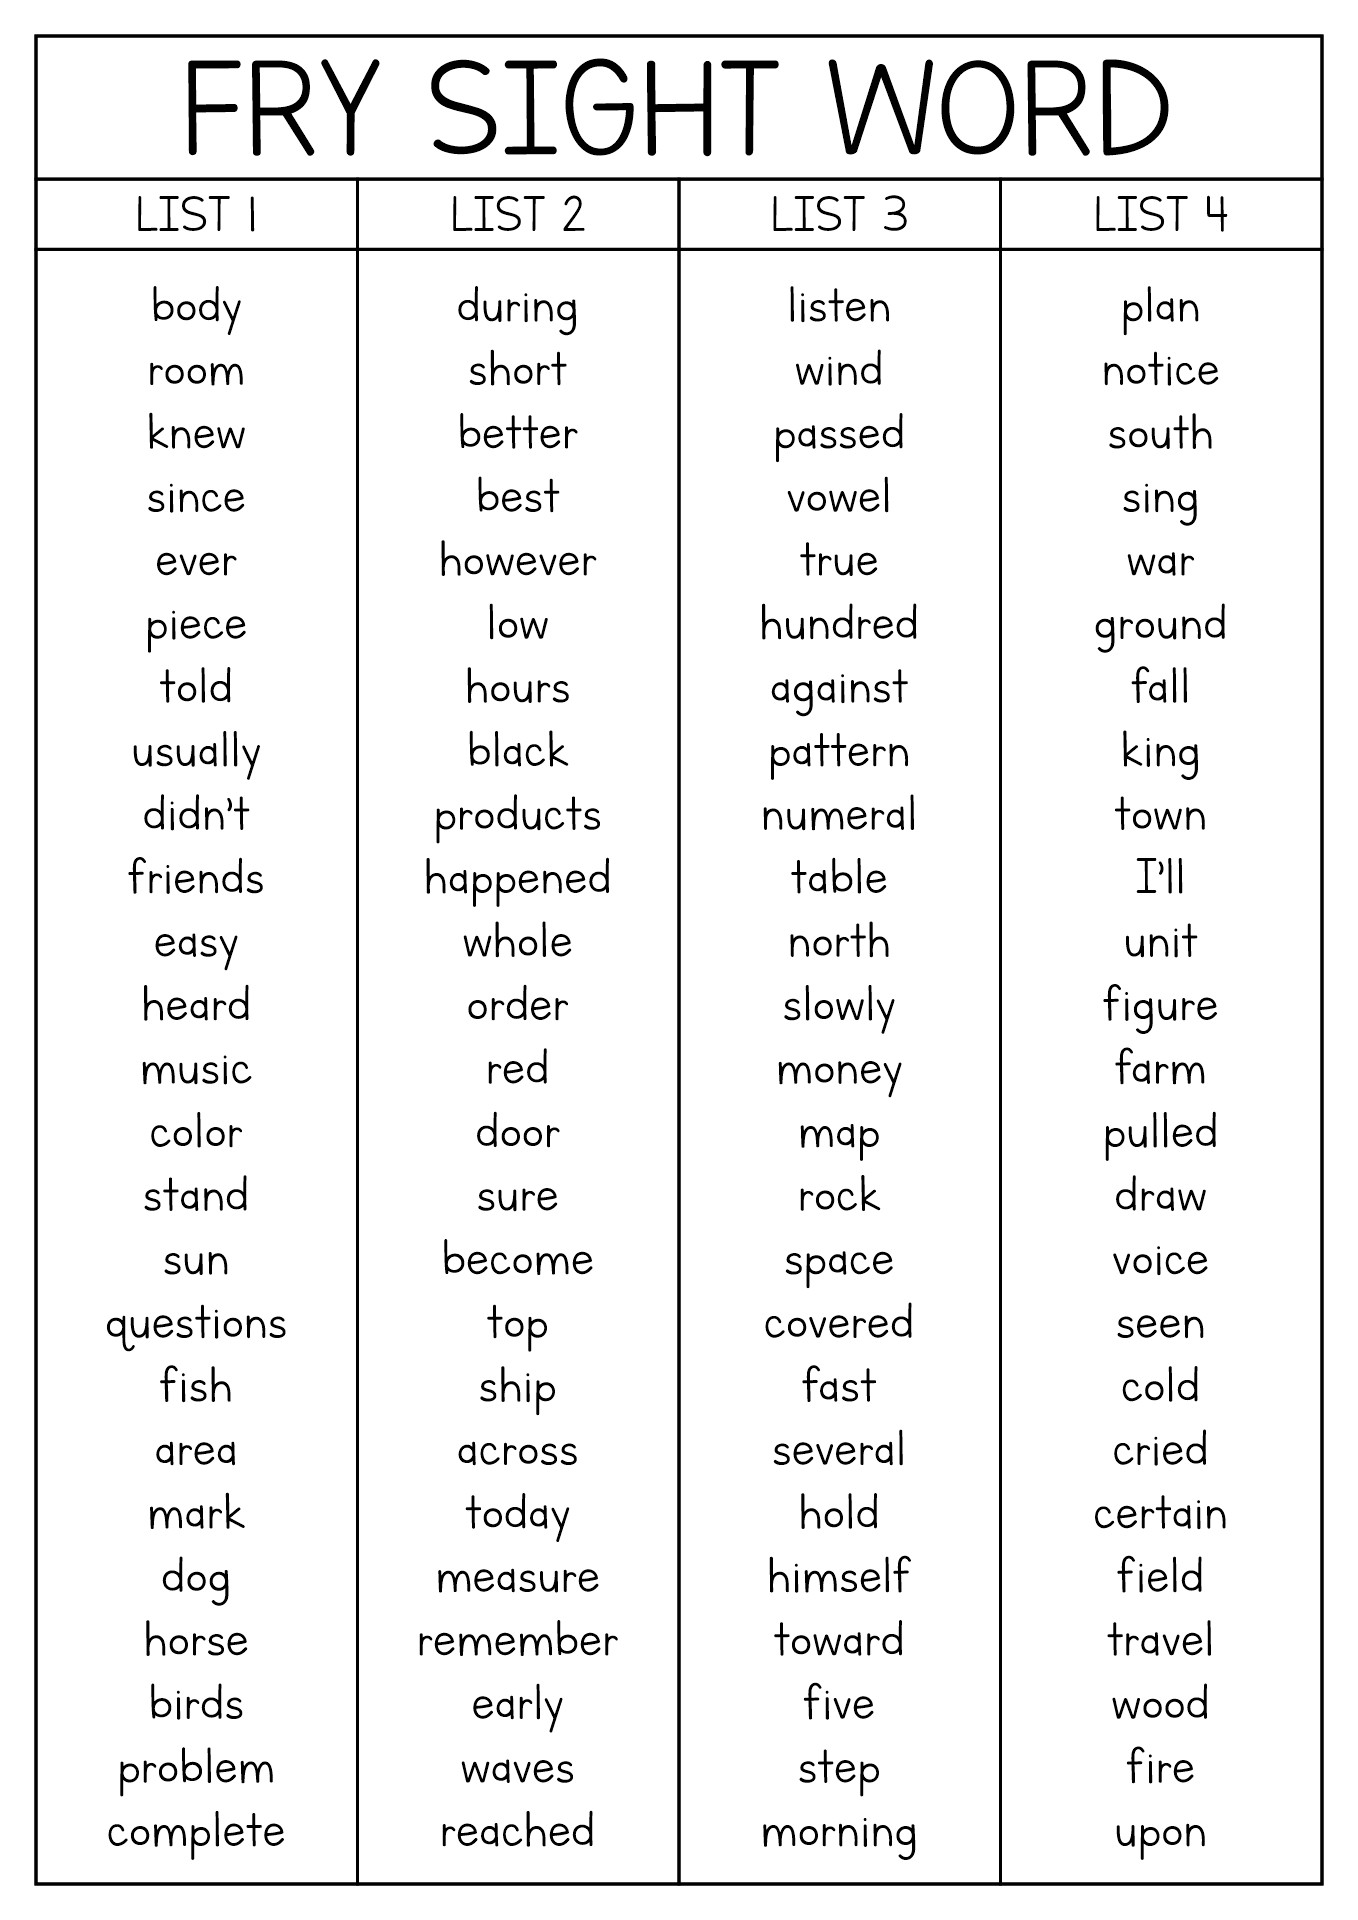 19 Best Images of Fry's First 100 Words Worksheets - 100 Fry Sight Word